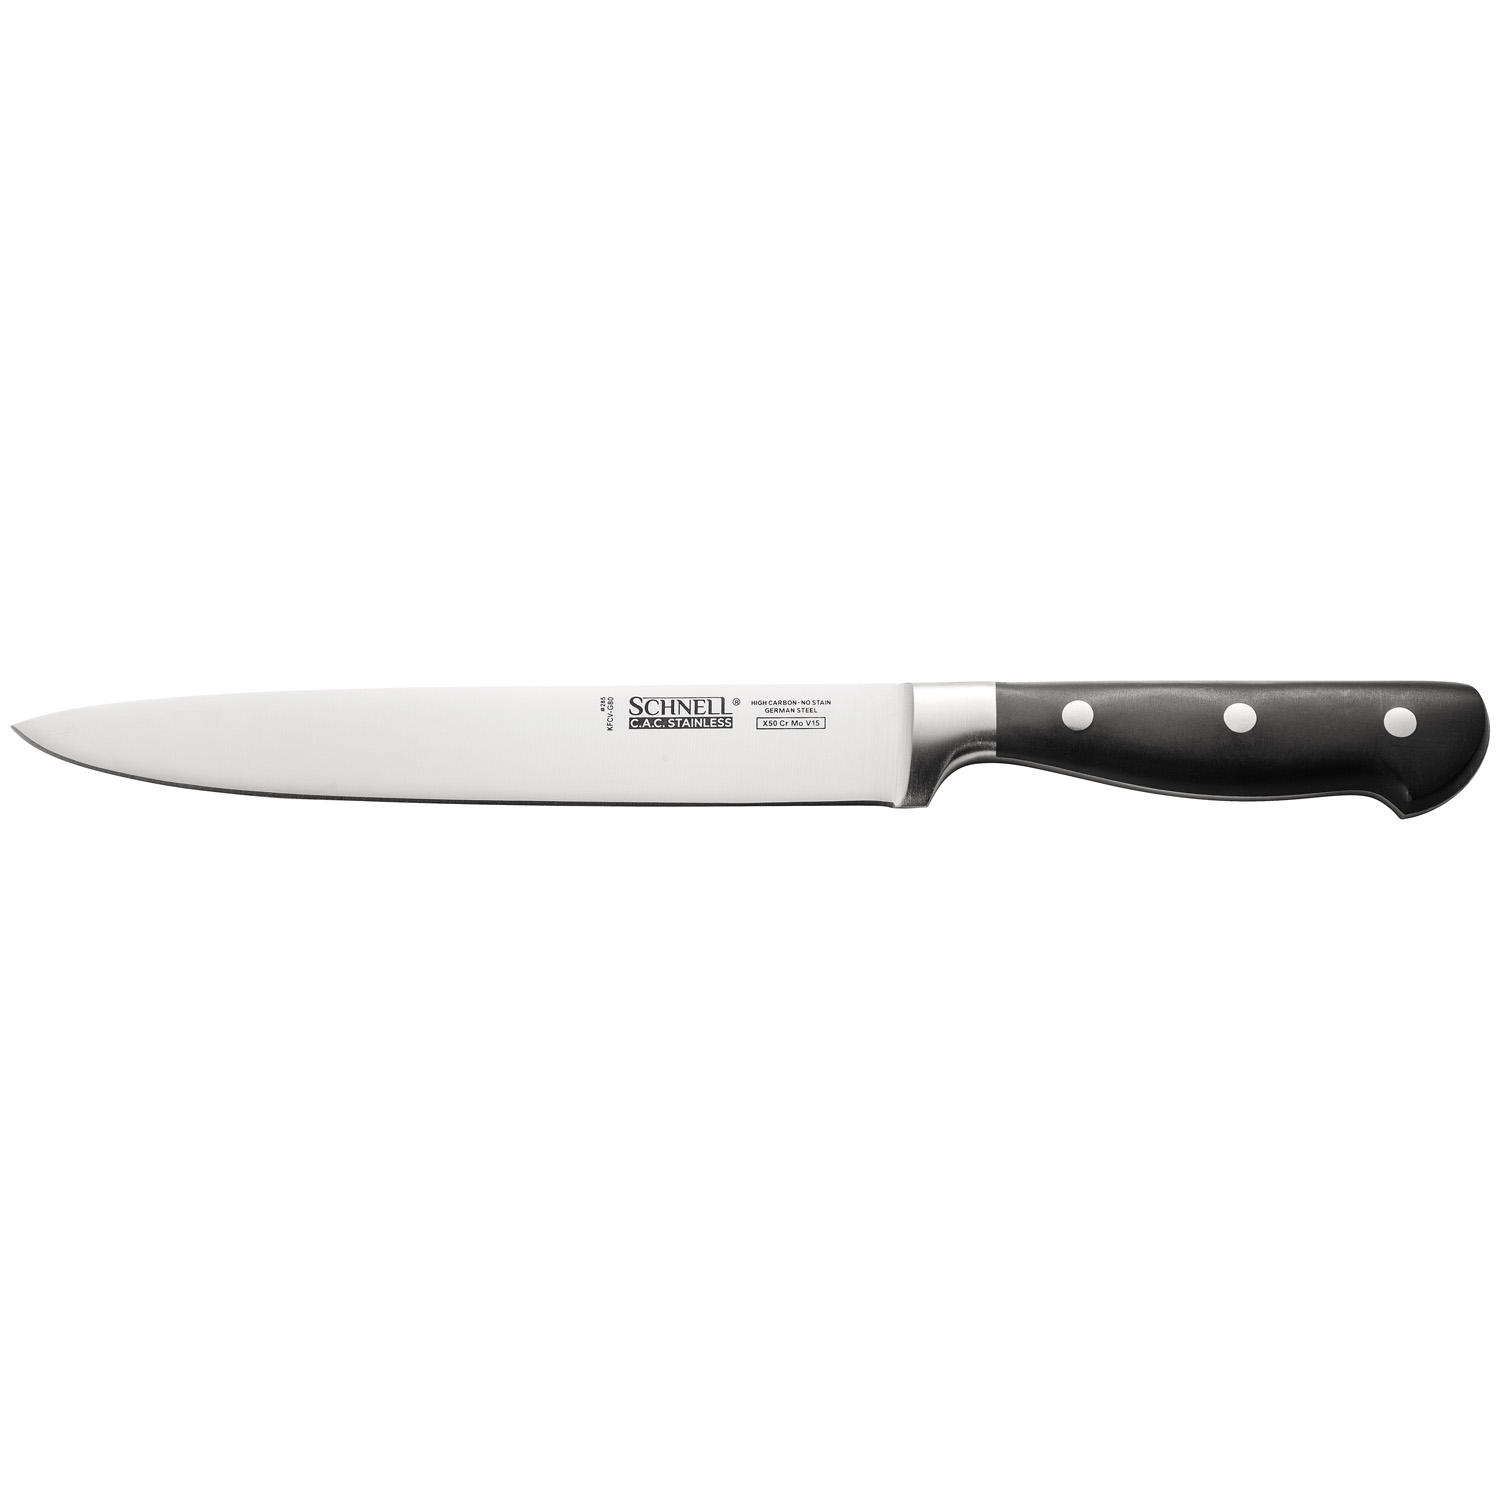 CAC China KFCV-G80 Schnell Forged Carving Knife 8"